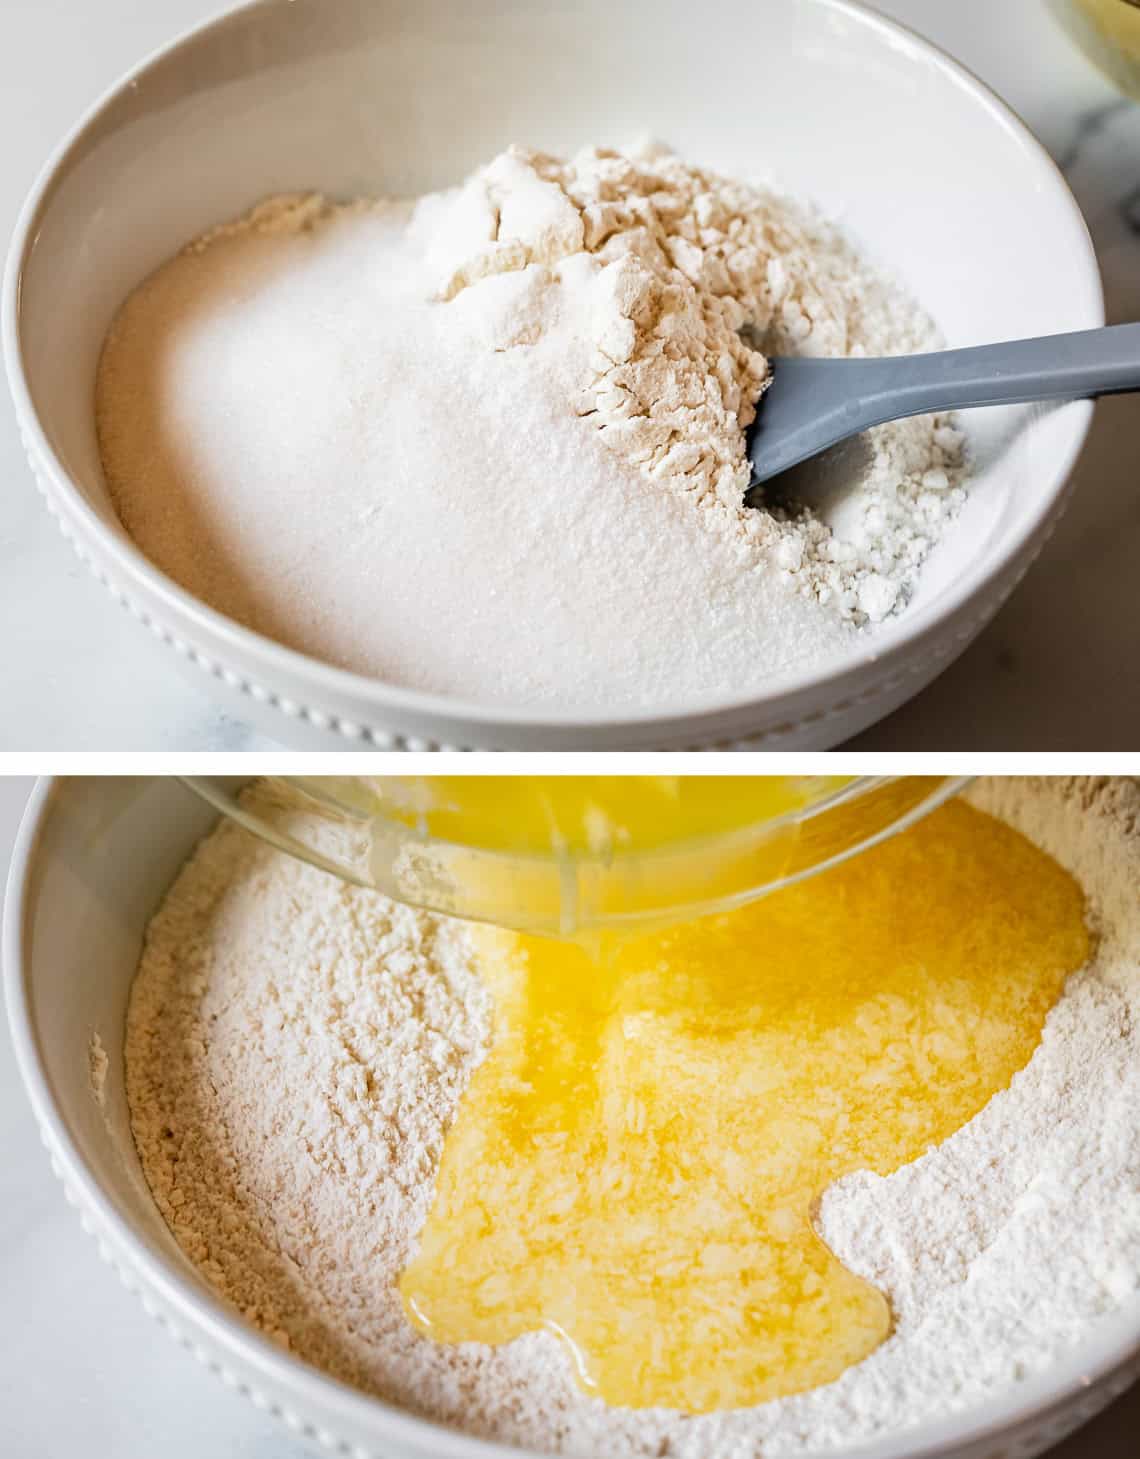 top pic: flour and sugar in a ceramic bowl, bottom melted butter being poured into bowl.